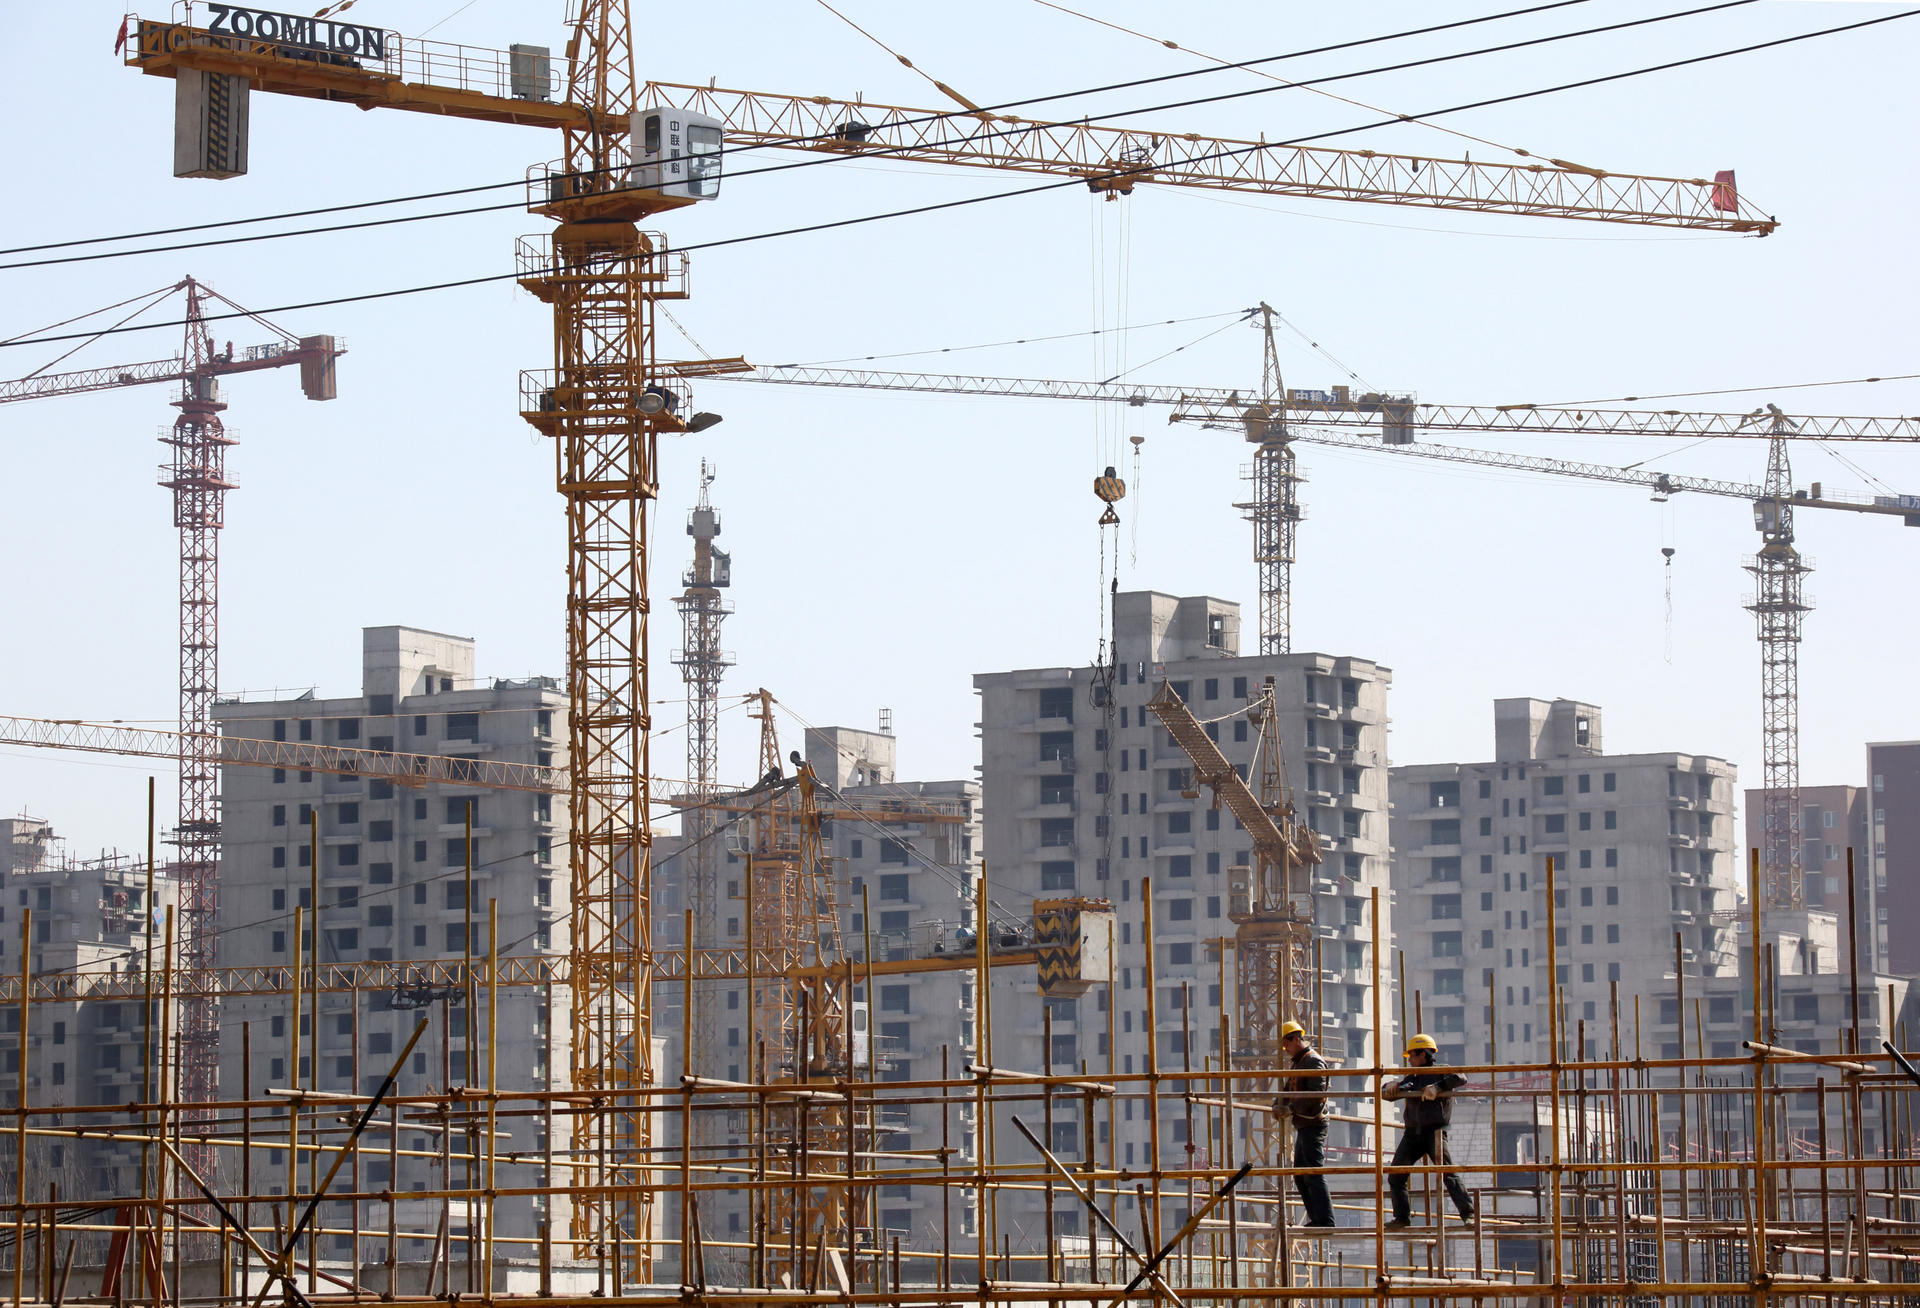 China Overseas Land says it added about 4.62 million square metres of gross floor area to its land bank in the first half. Photo: Bloomberg